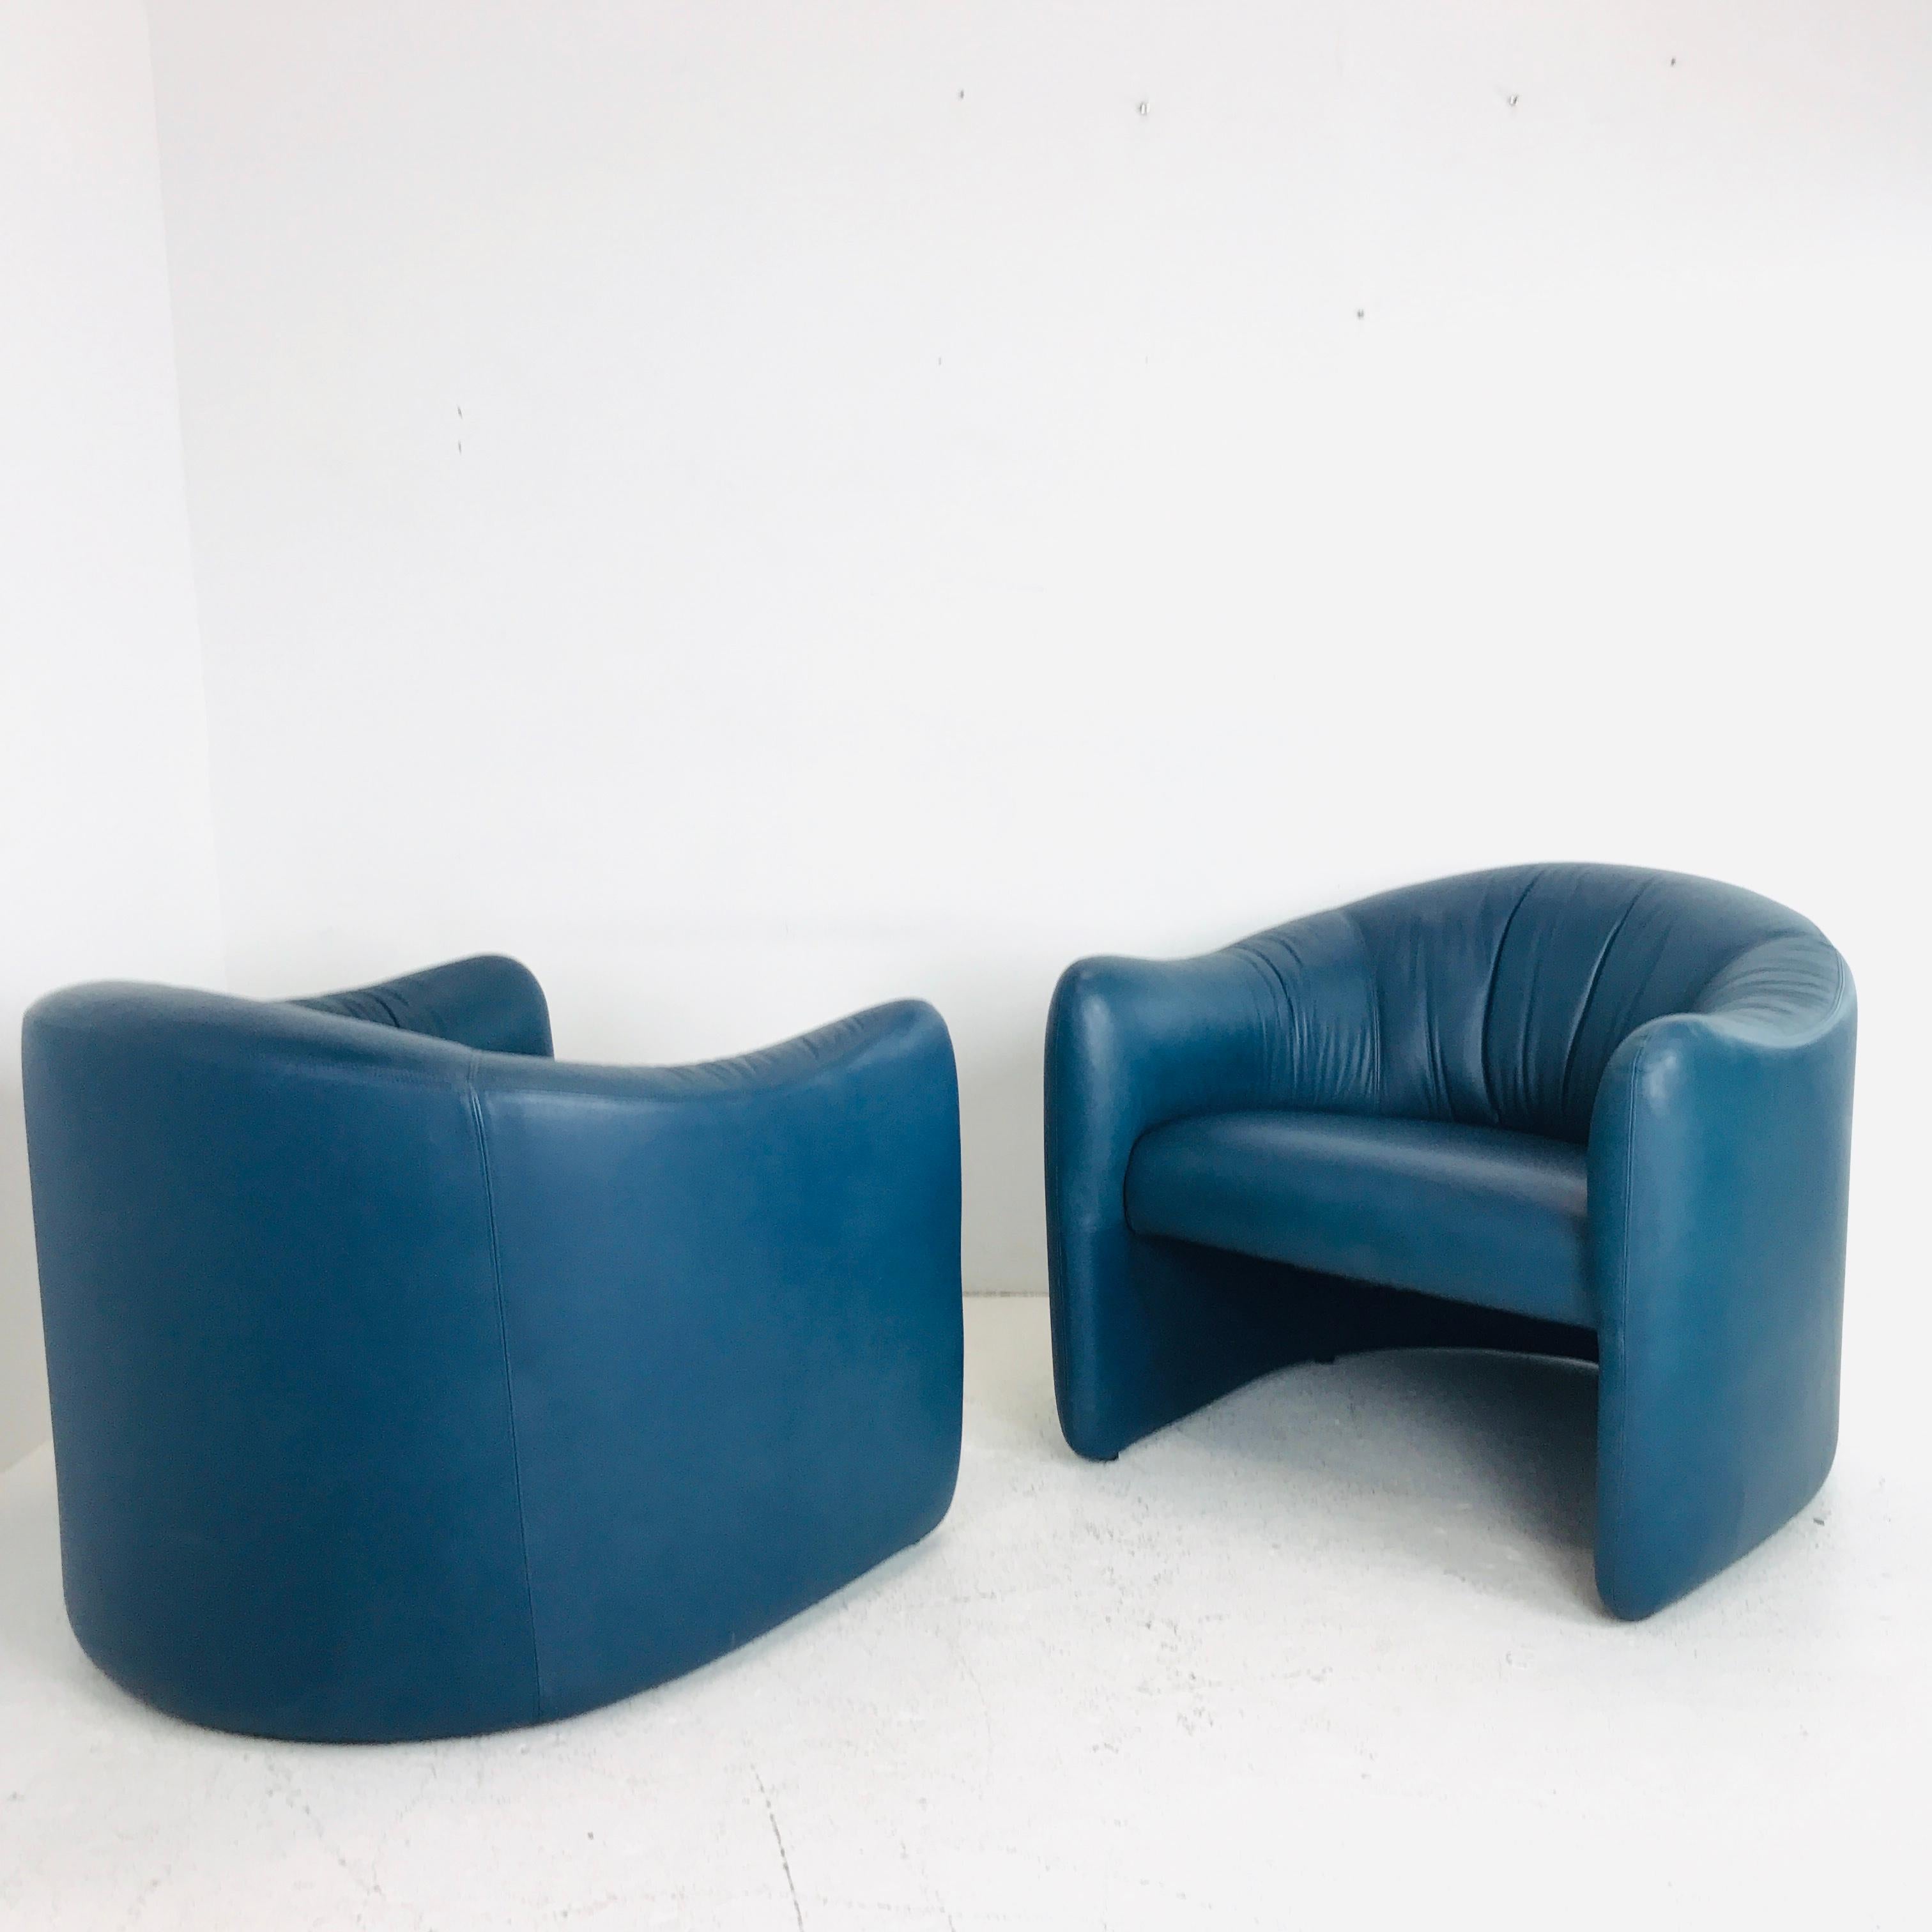 20th Century Pair of Blue Leather Metro Lounge Chairs